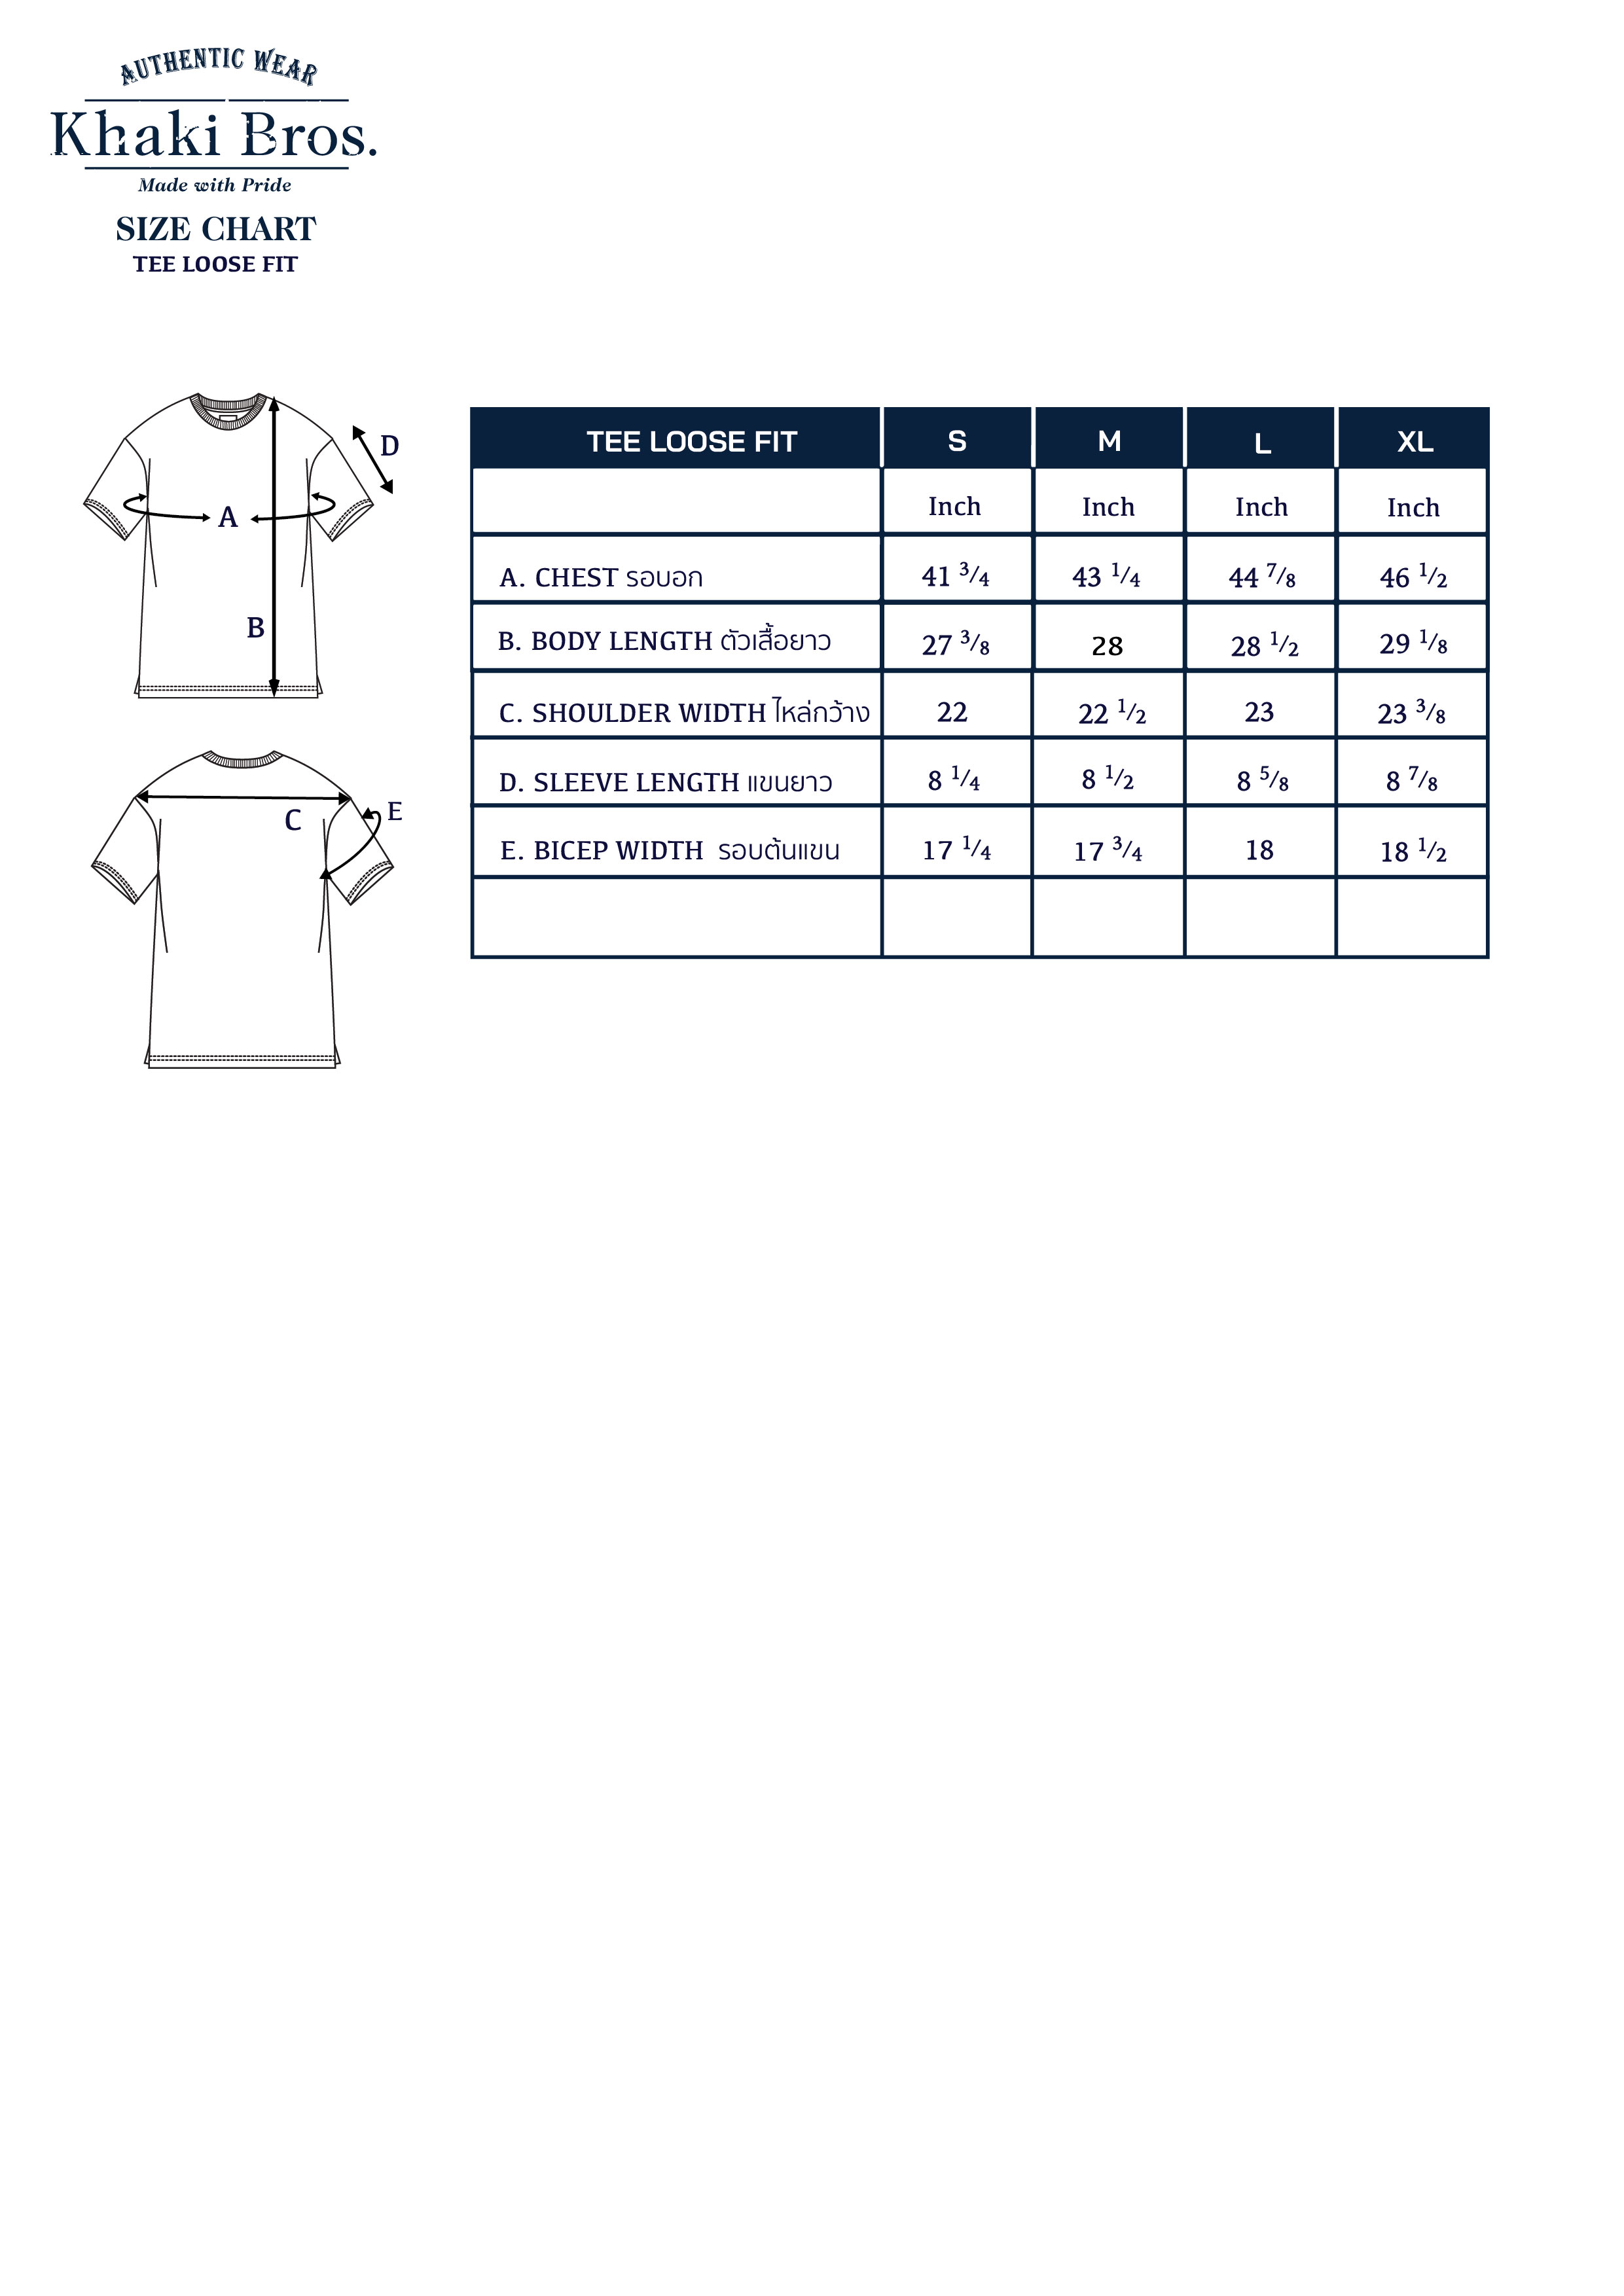 Tee_Loose_Fit_Size_Chart_2022_Update-15_2